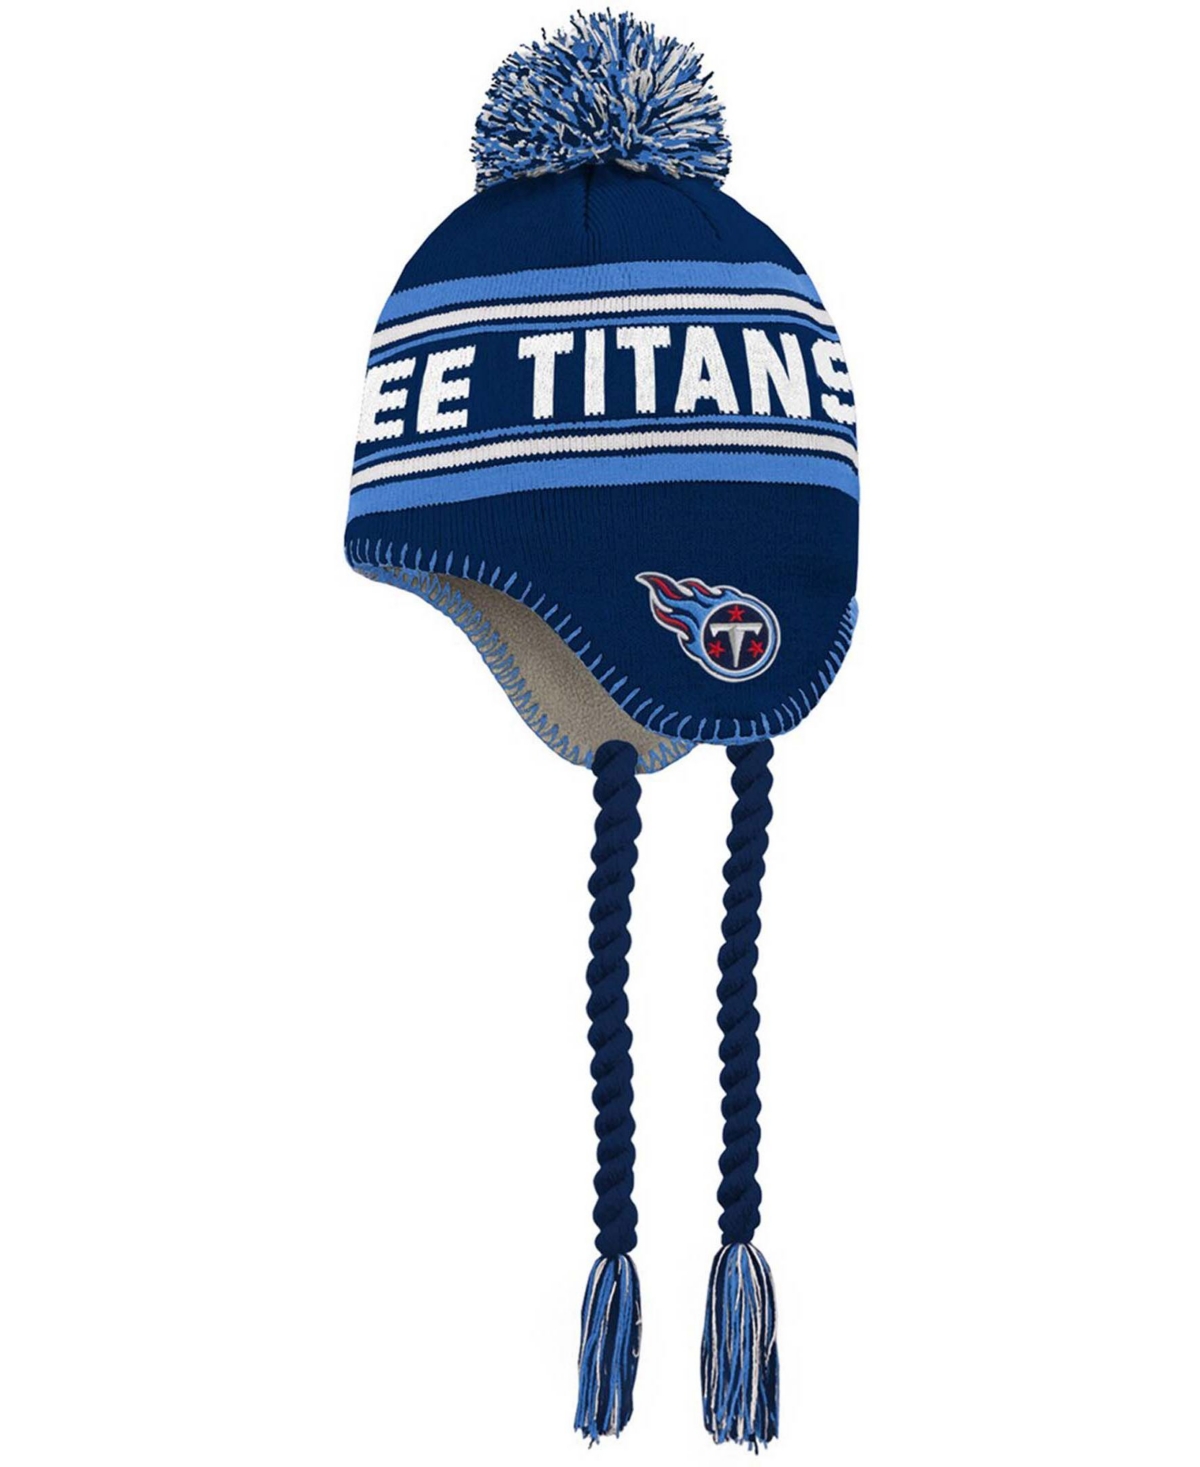 Outerstuff Kids' Big Boys And Girls Navy And Light Blue Tennessee Titans Jacquard Tassel Knit Hat With Pom In Navy,light Blue